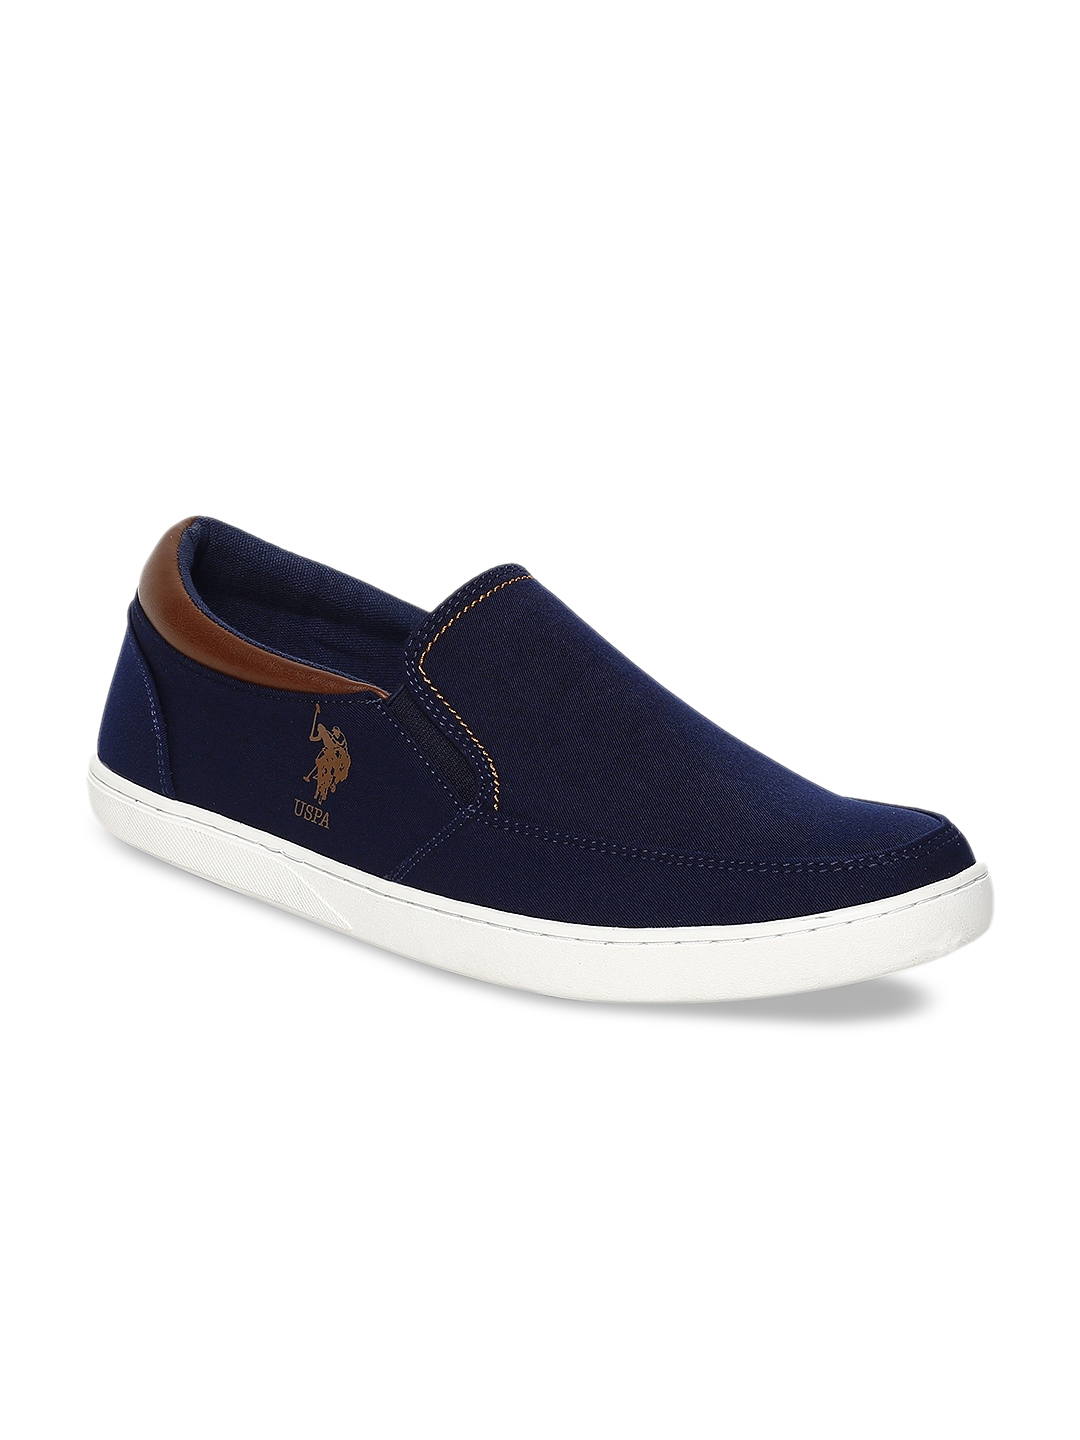 Buy U.S. Polo Assn. Men Navy Blue Solid Slip On Sneakers - Casual Shoes ...